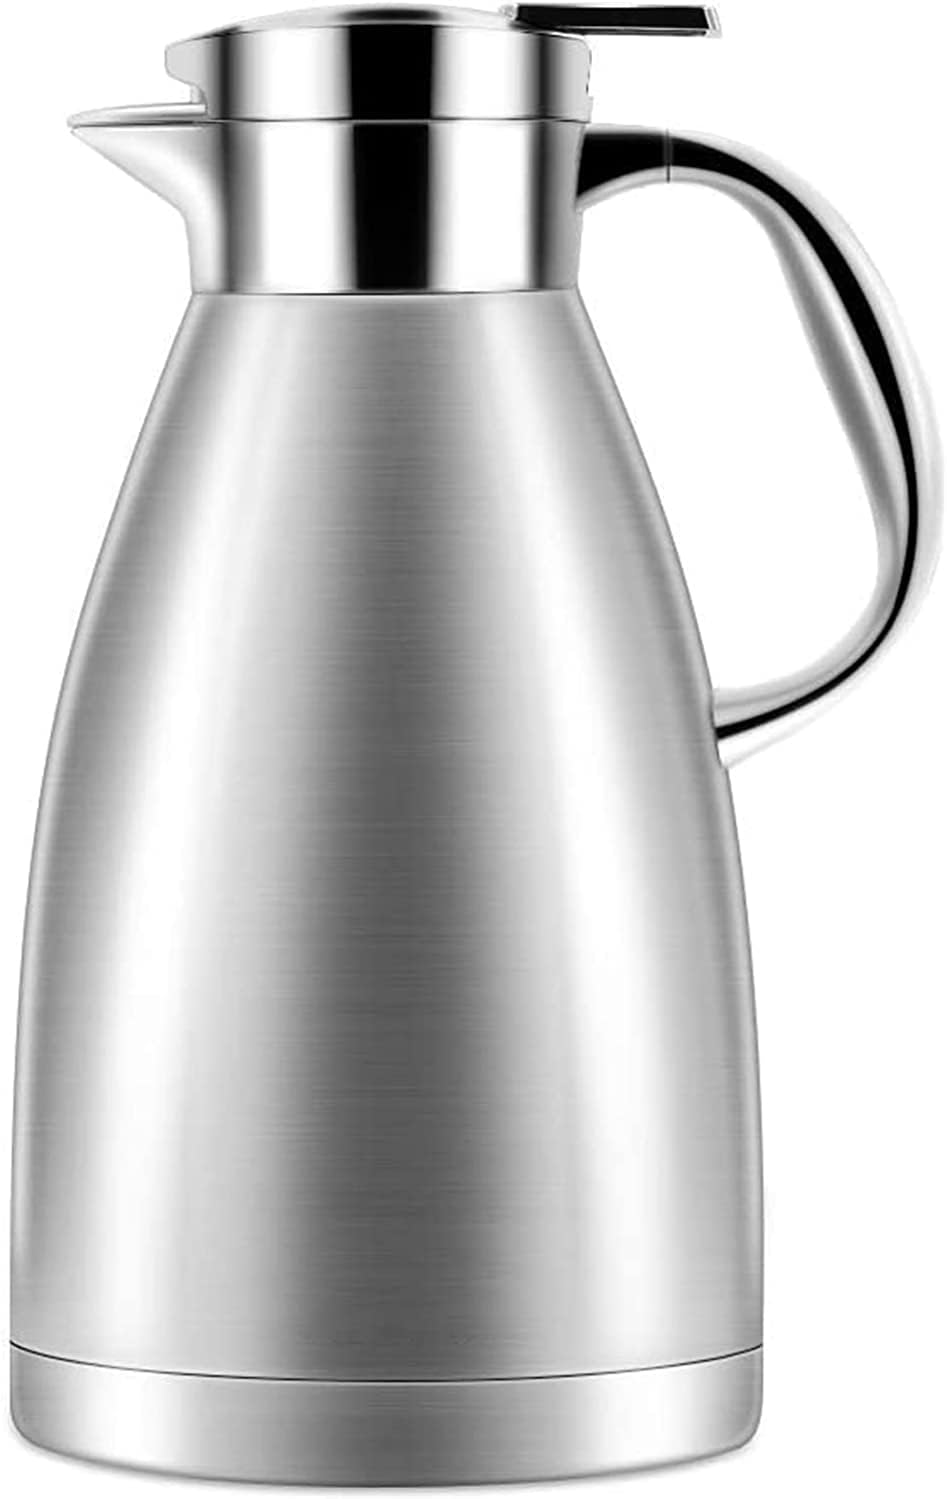 68oz Coffee Carafe 18/10 Stainless Steel/Double Walled Vacuum Insulate